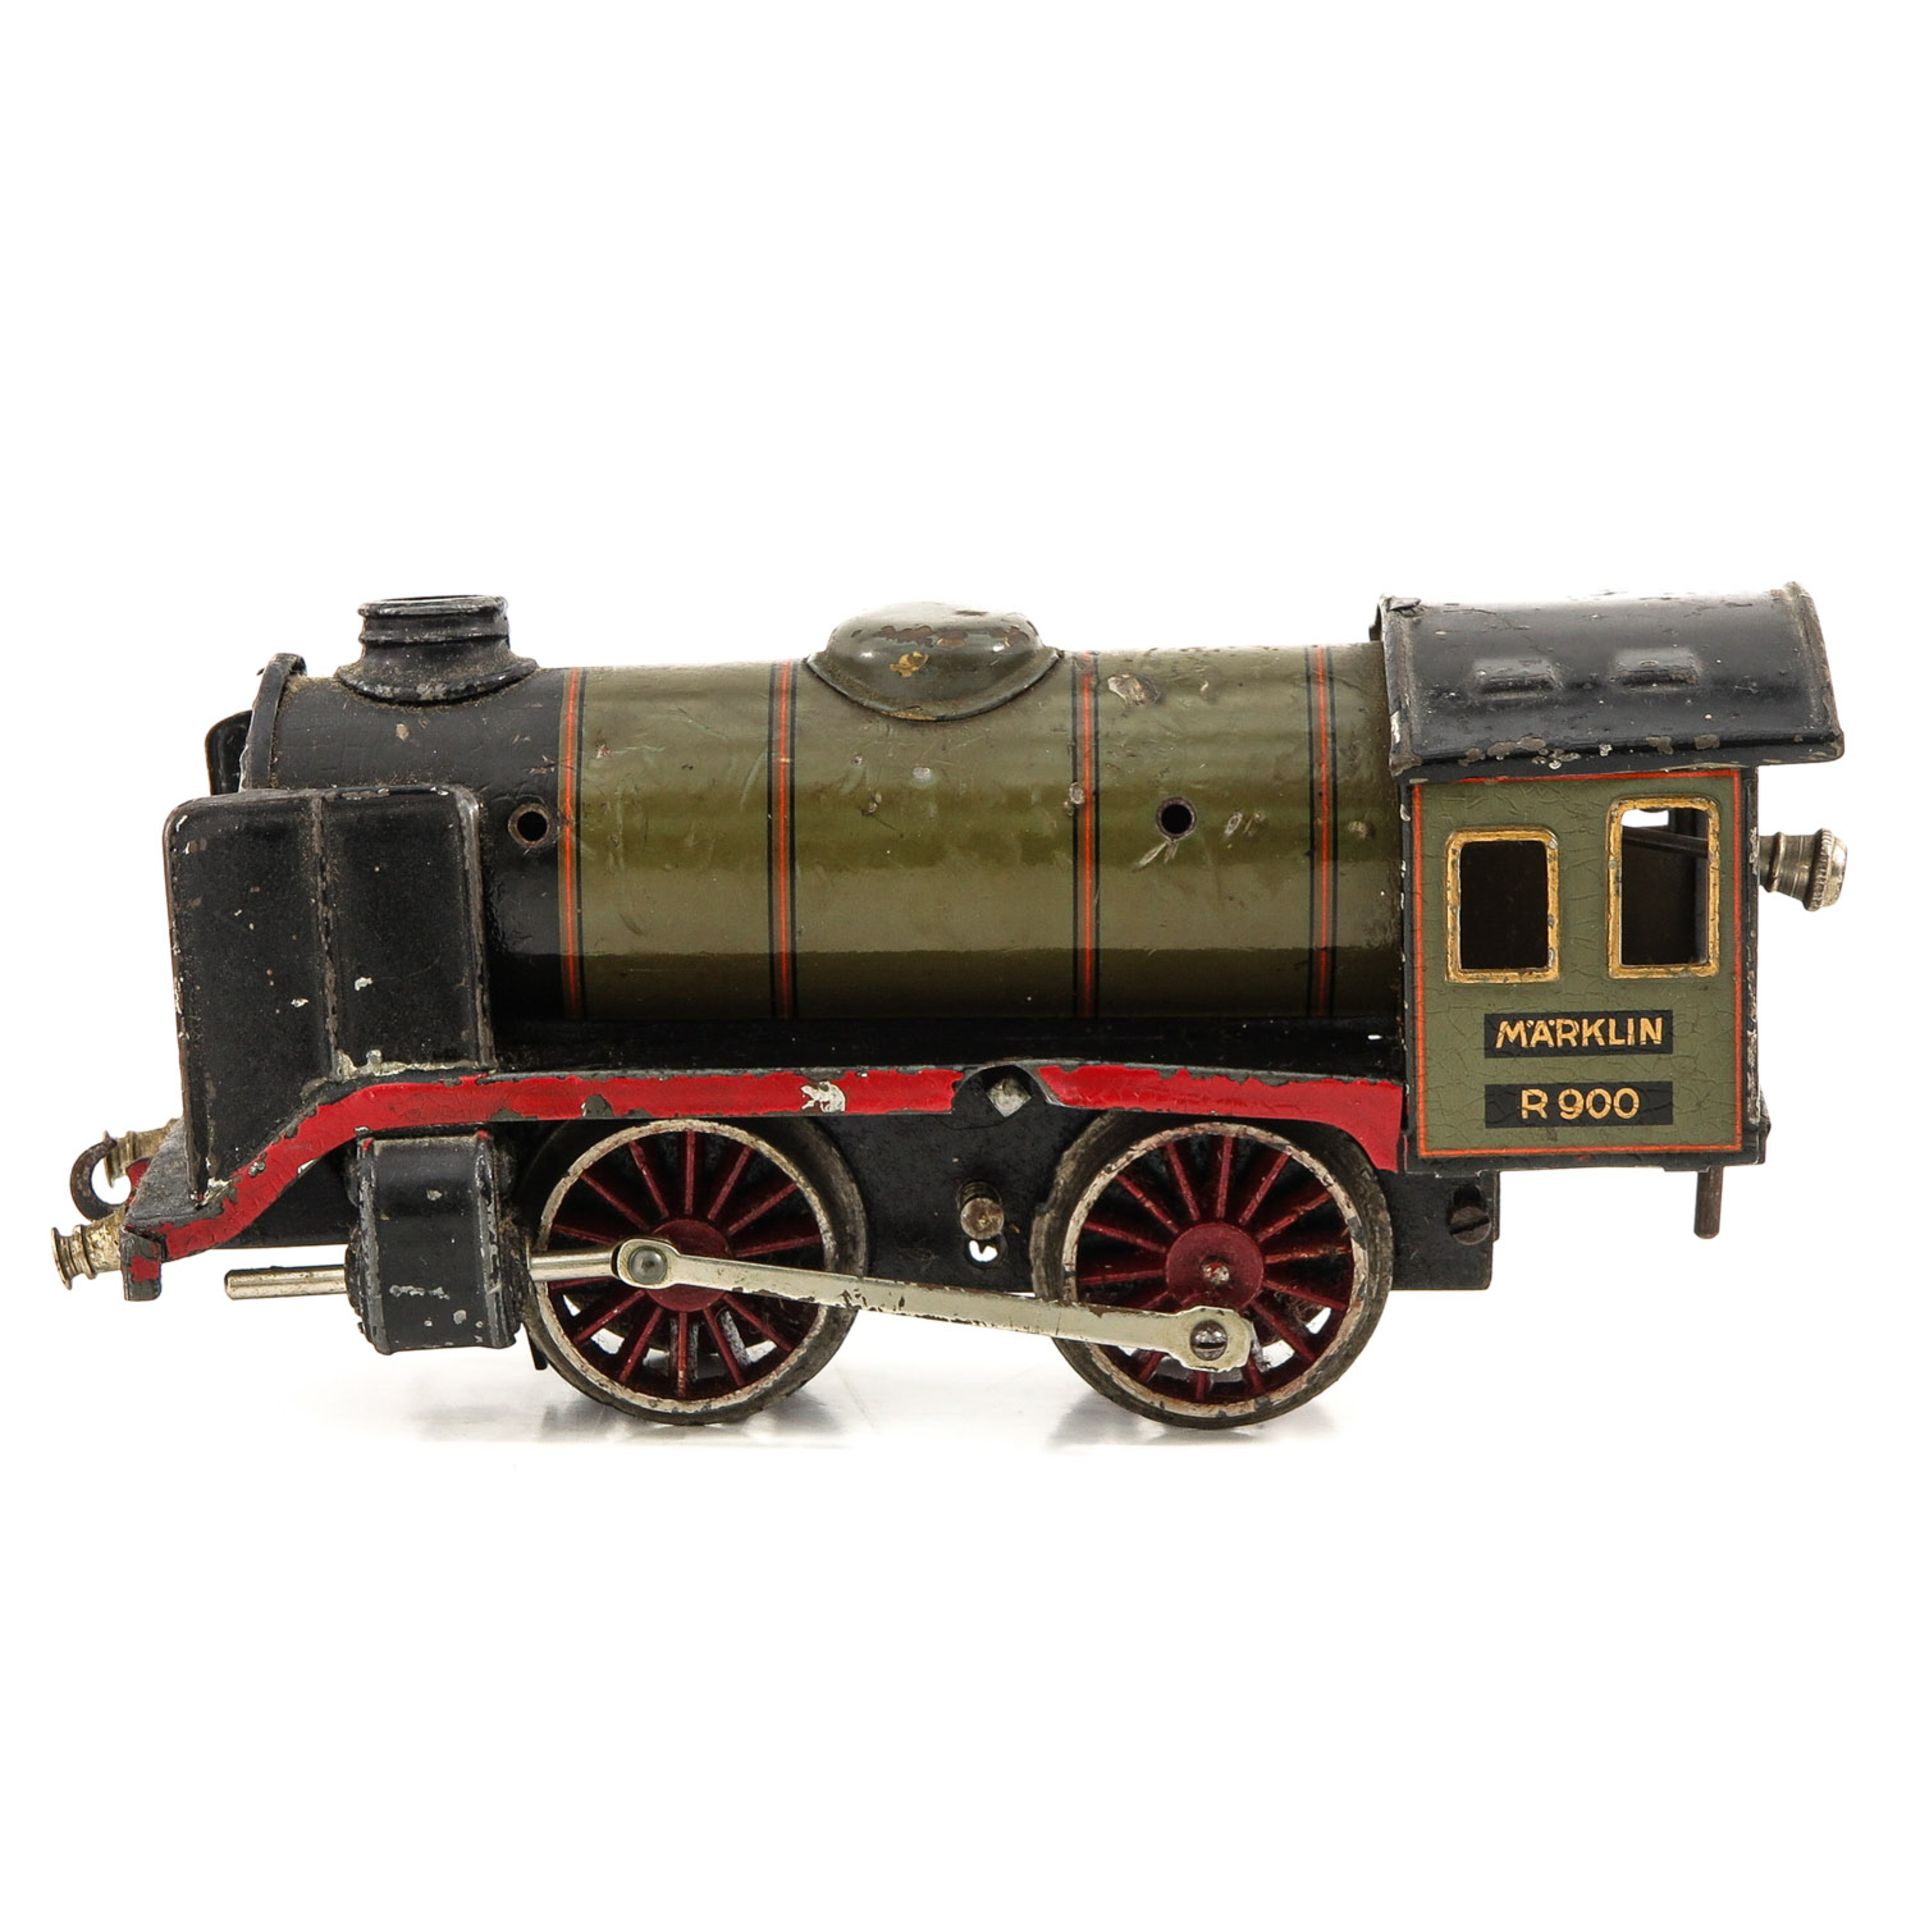 A Collection of Marklin Trains and Accessories - Image 9 of 10